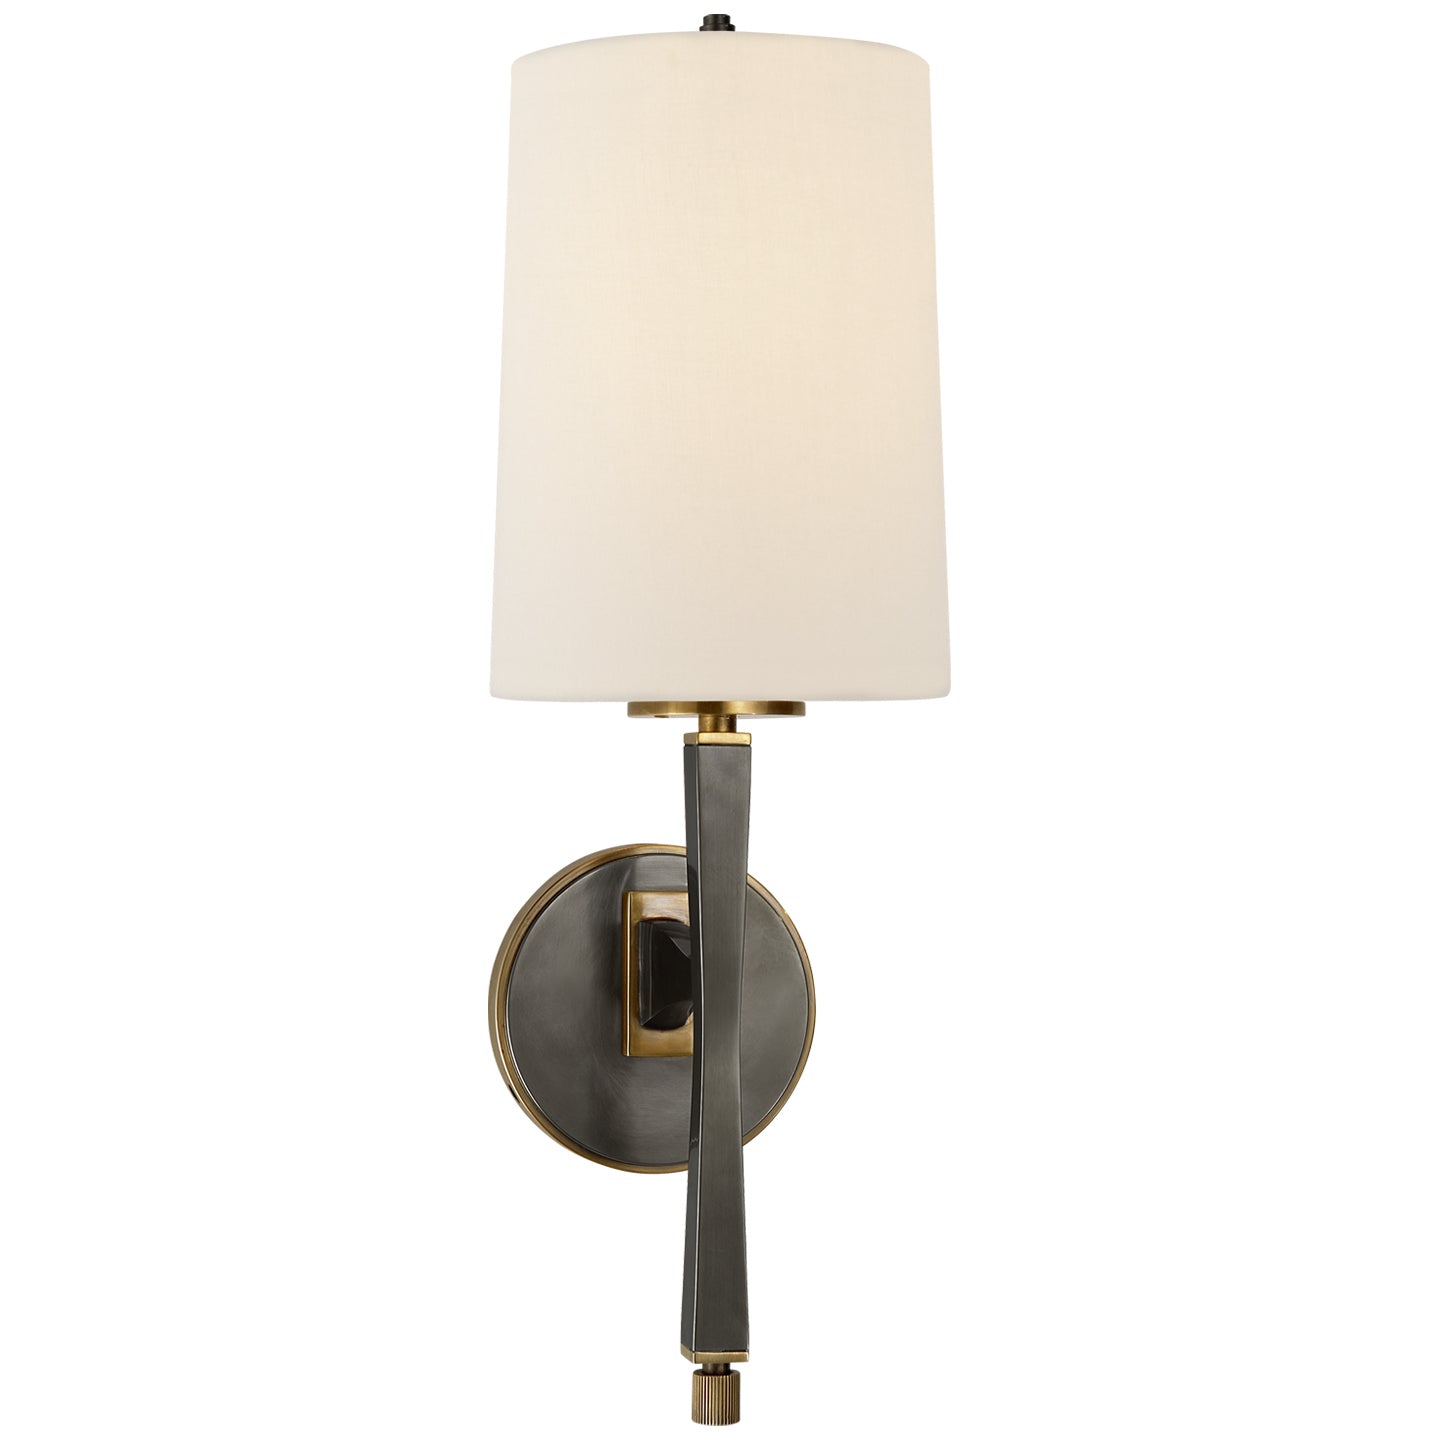 Visual Comfort Signature - TOB 2740BZ/HAB-L - One Light Wall Sconce - Edie - Bronze with Antique Brass